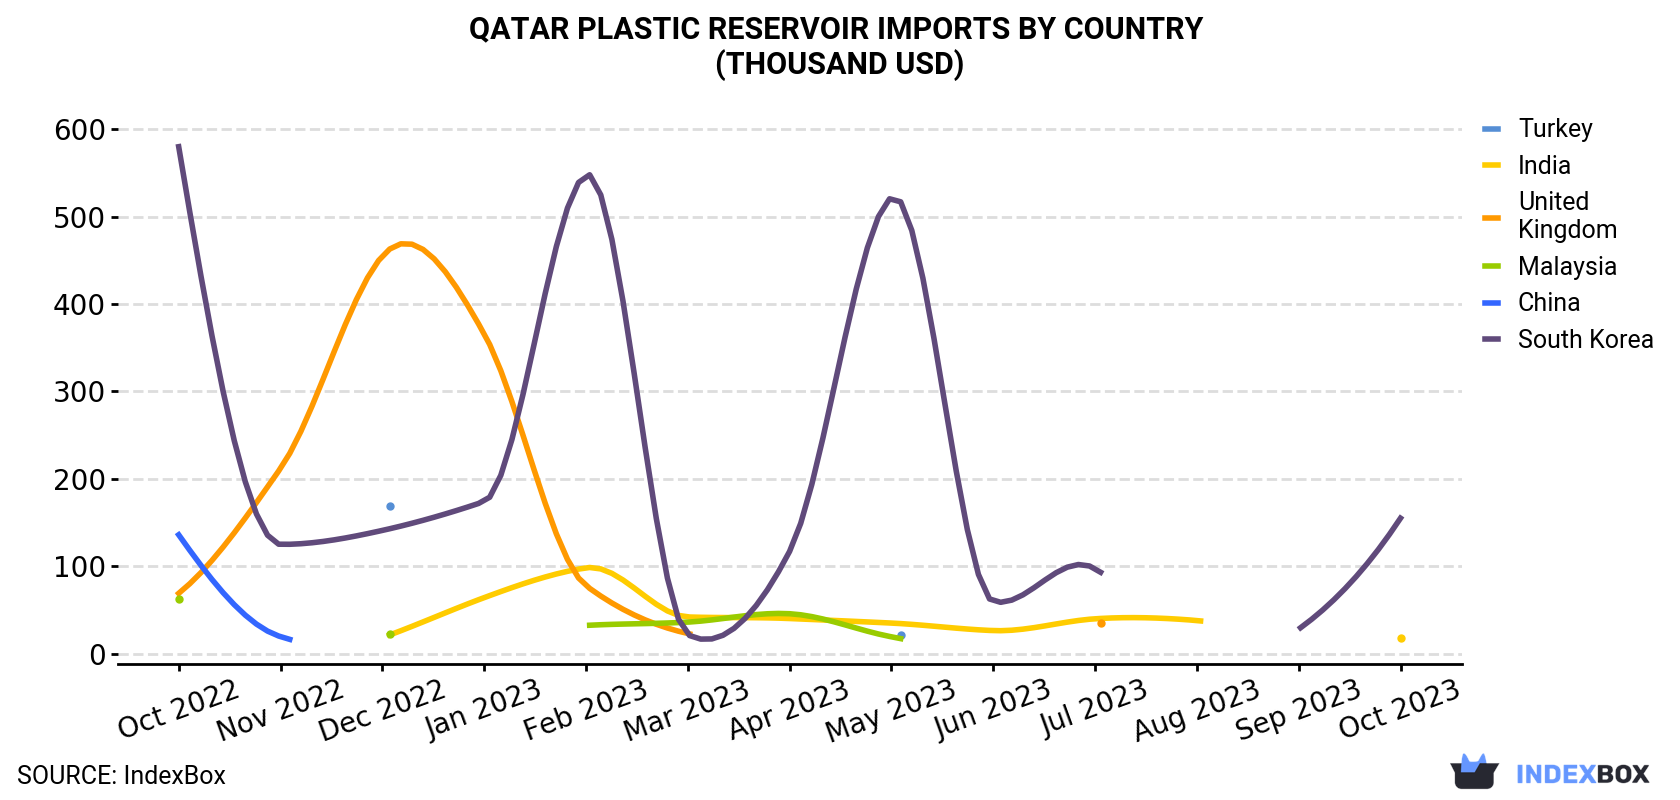 Qatar Plastic Reservoir Imports By Country (Thousand USD)